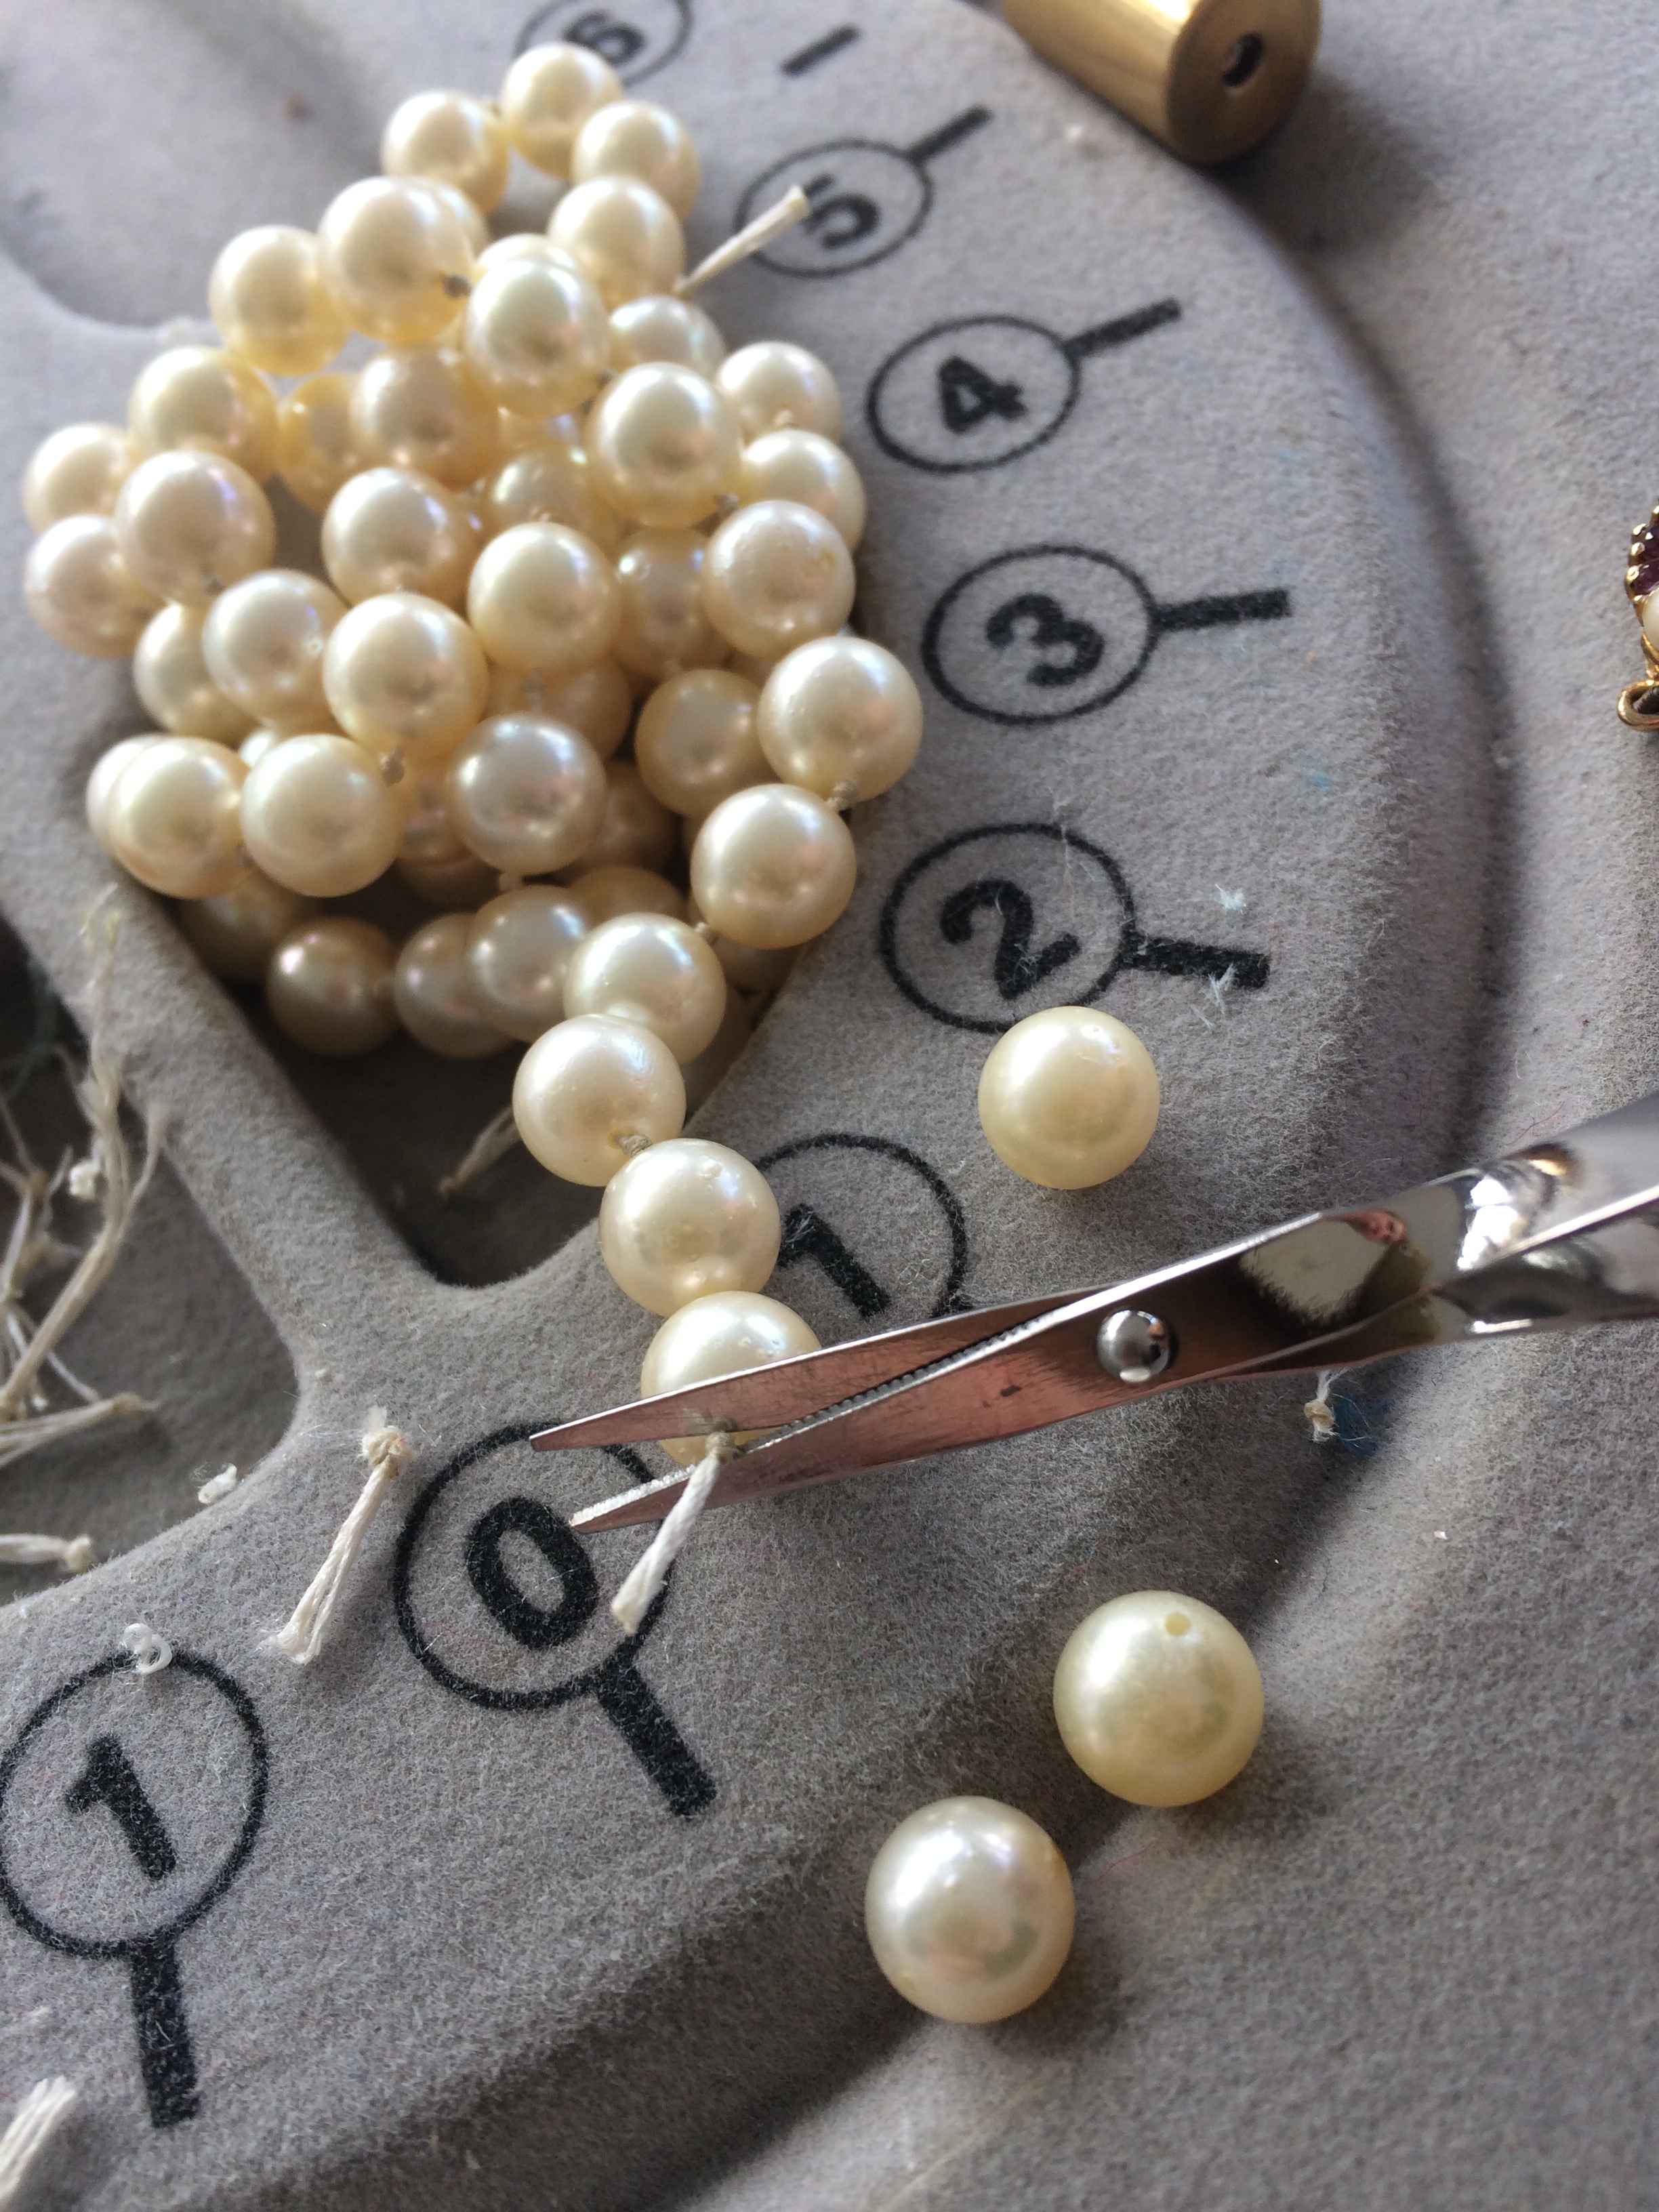 Cutting each knot to remove the individual pearls